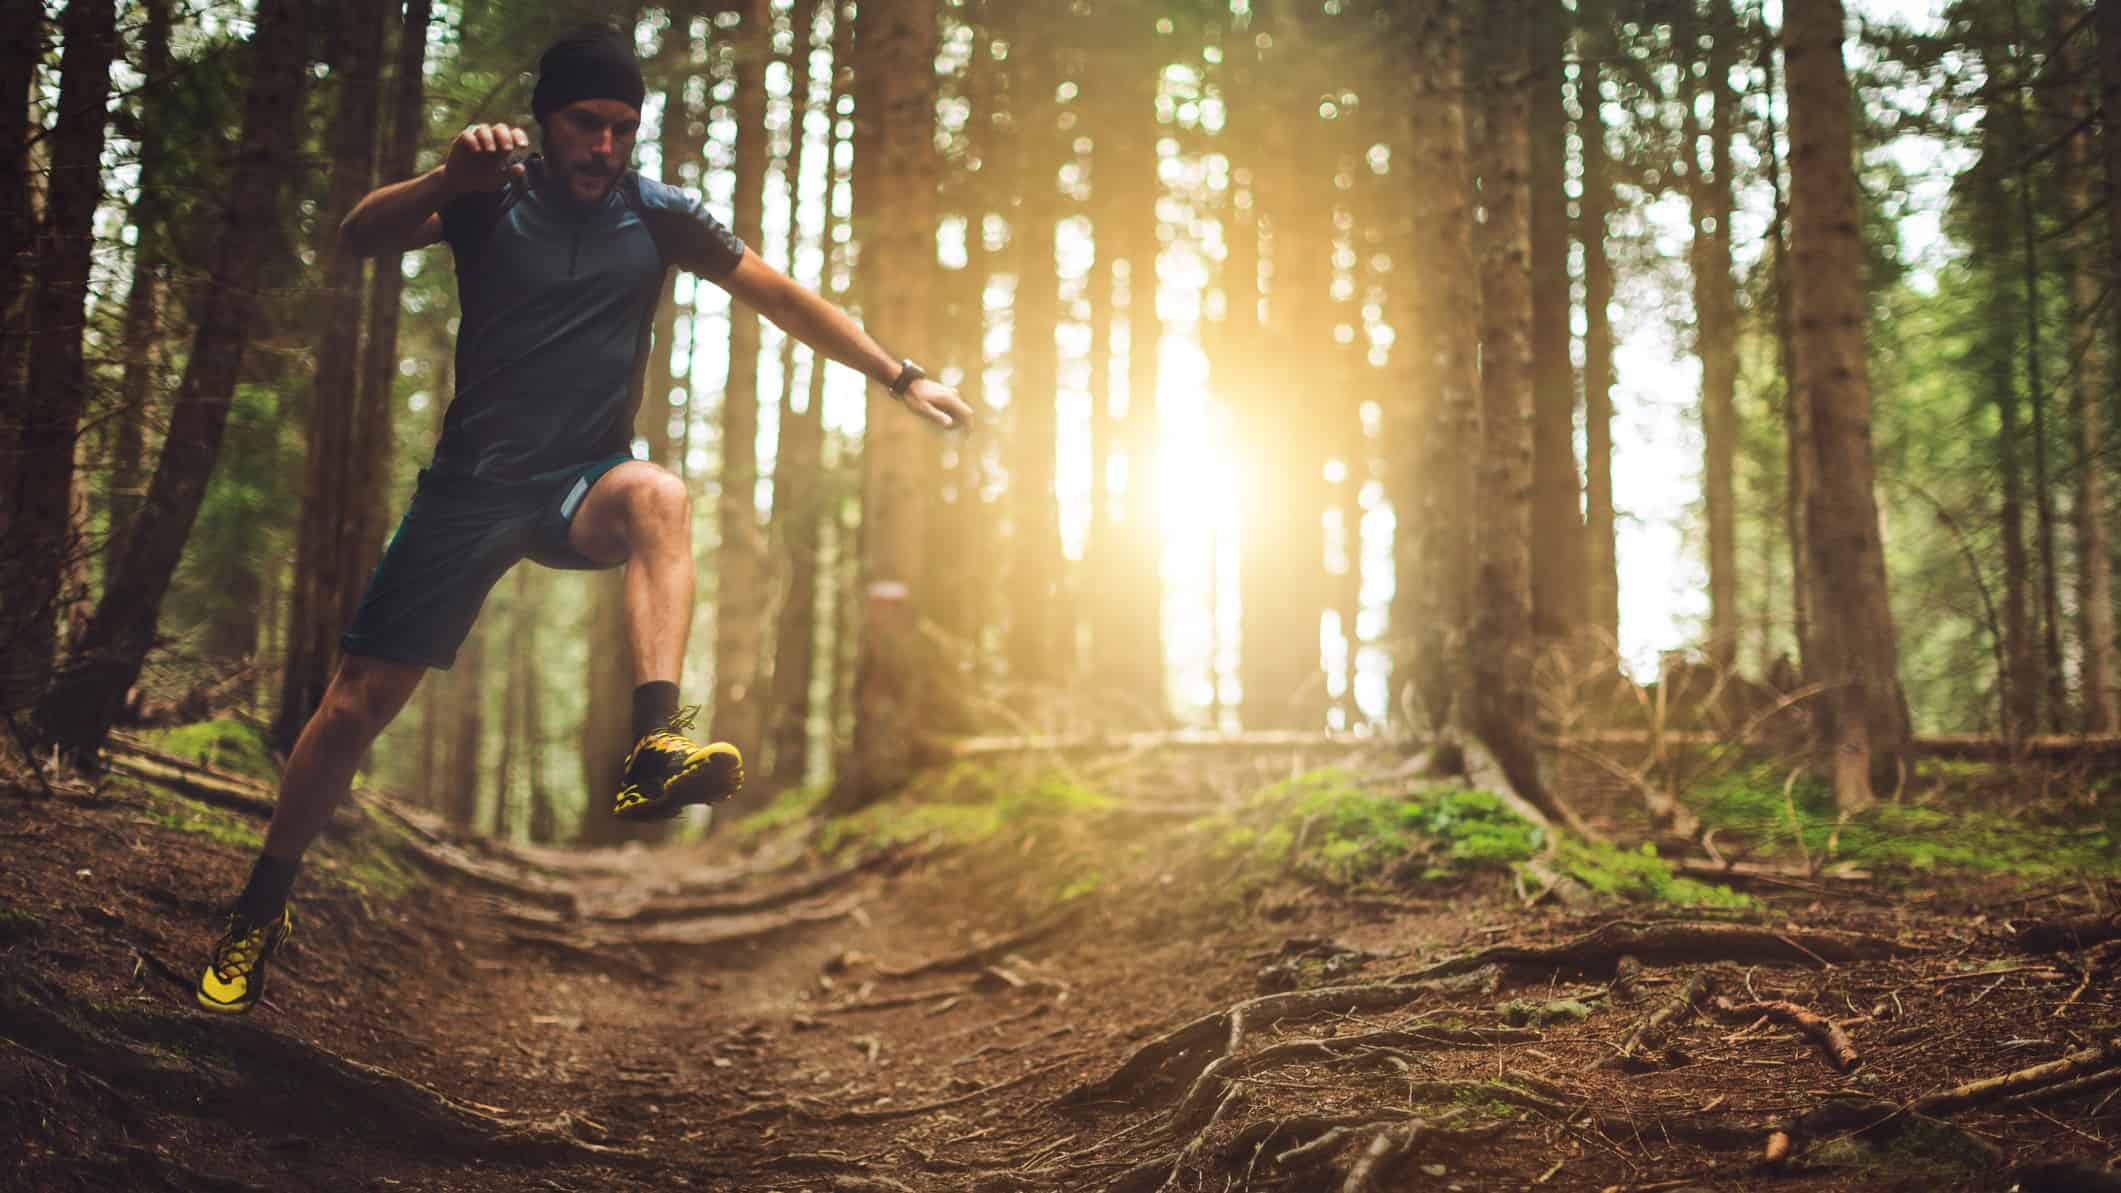 A mle runner is in an awkward pose as the approaches an unever part of a running track through a forest with tall trees and sunlight shining through them.